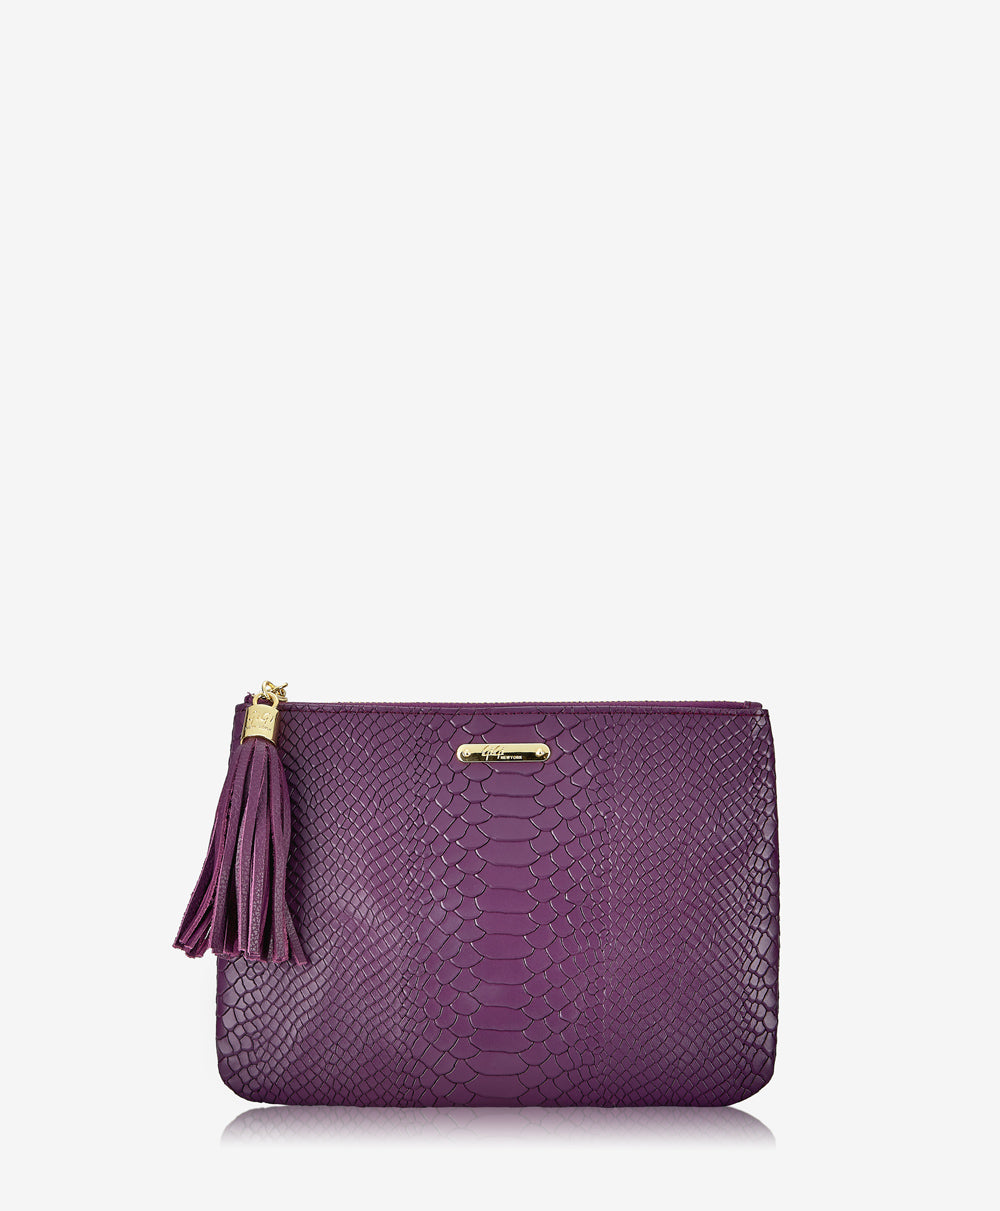 GiGi New York All In One Clutch Bag Acai Embossed Python Leather